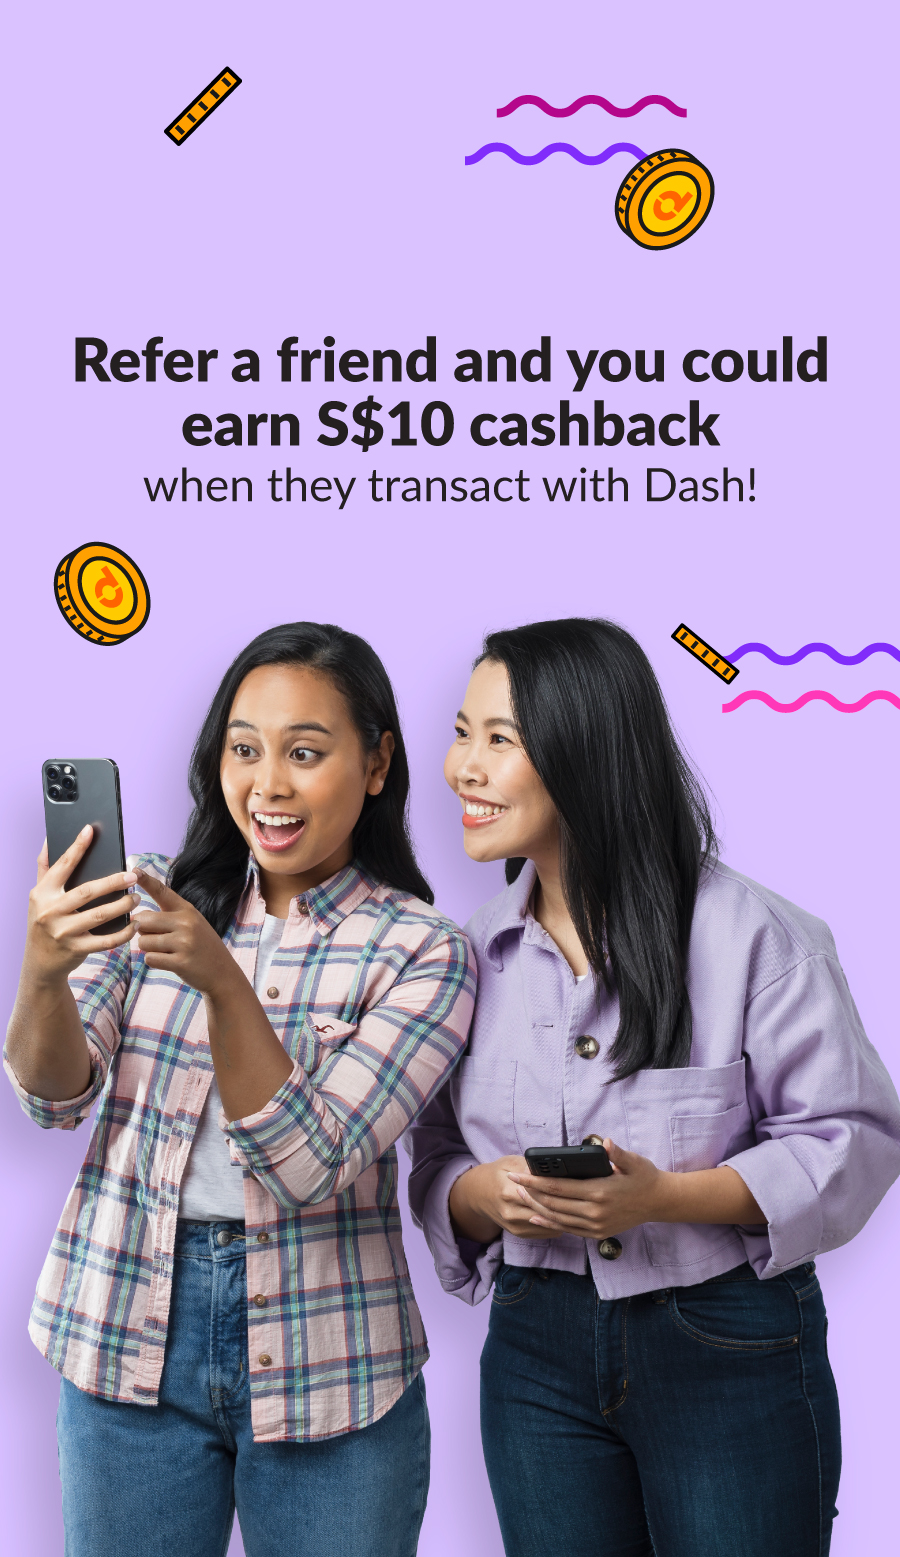 RRefer a friend and you could earn s$10 cashback when they transact with Dash!